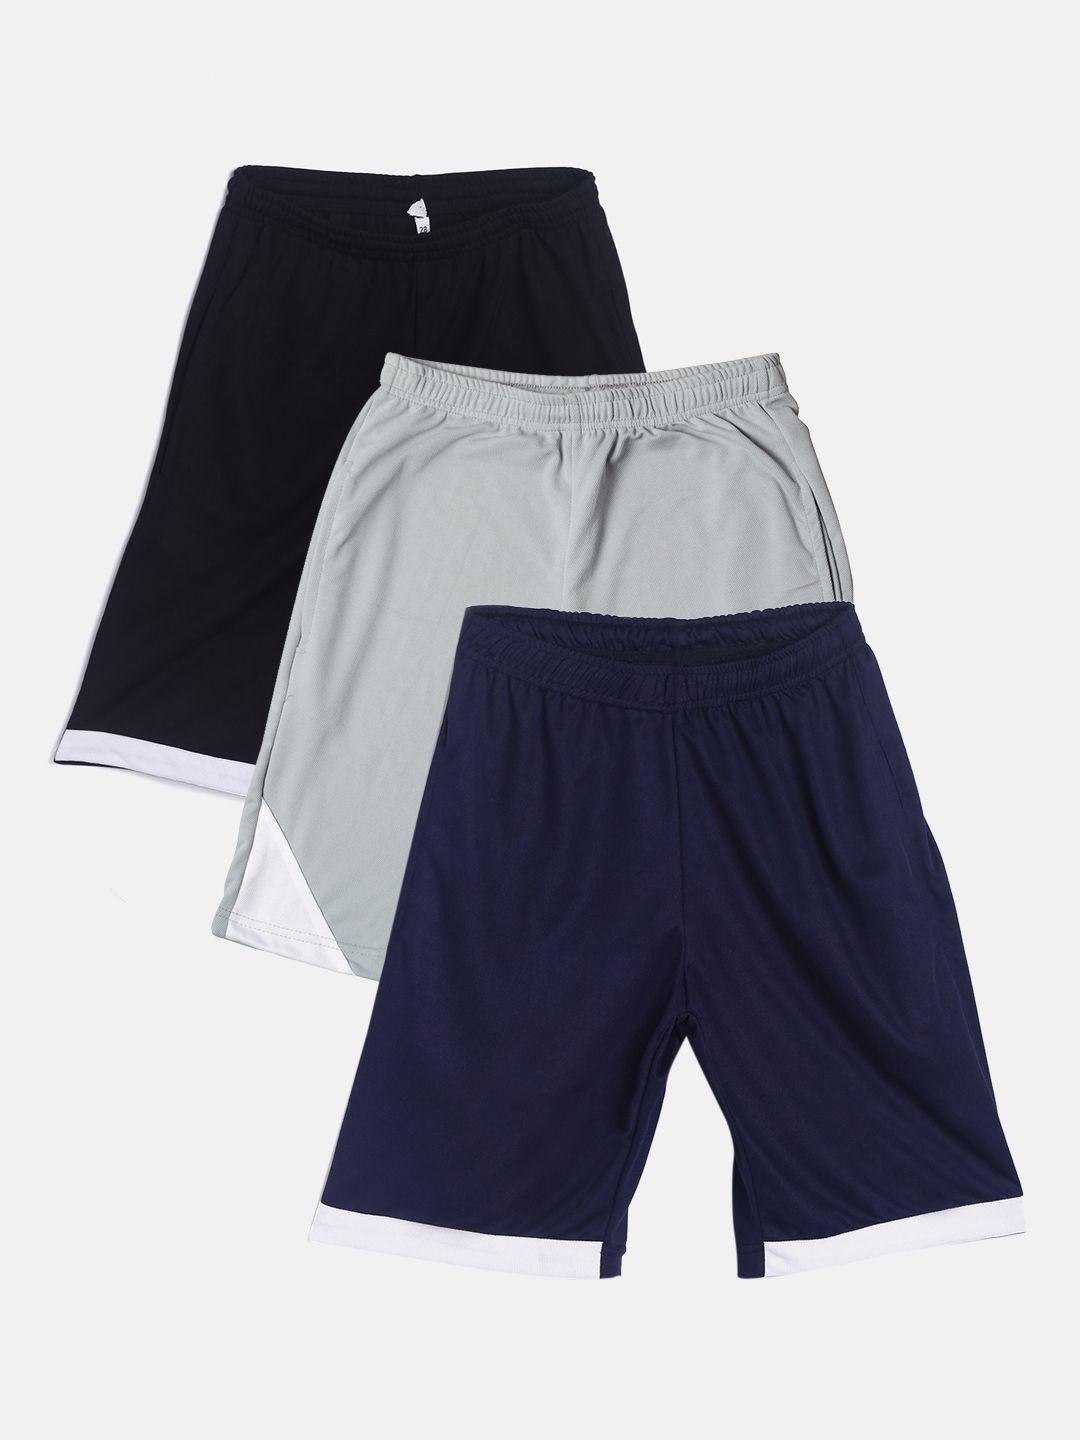 tiny hug boys pack of 2 black and grey high-rise outdoor sports shorts